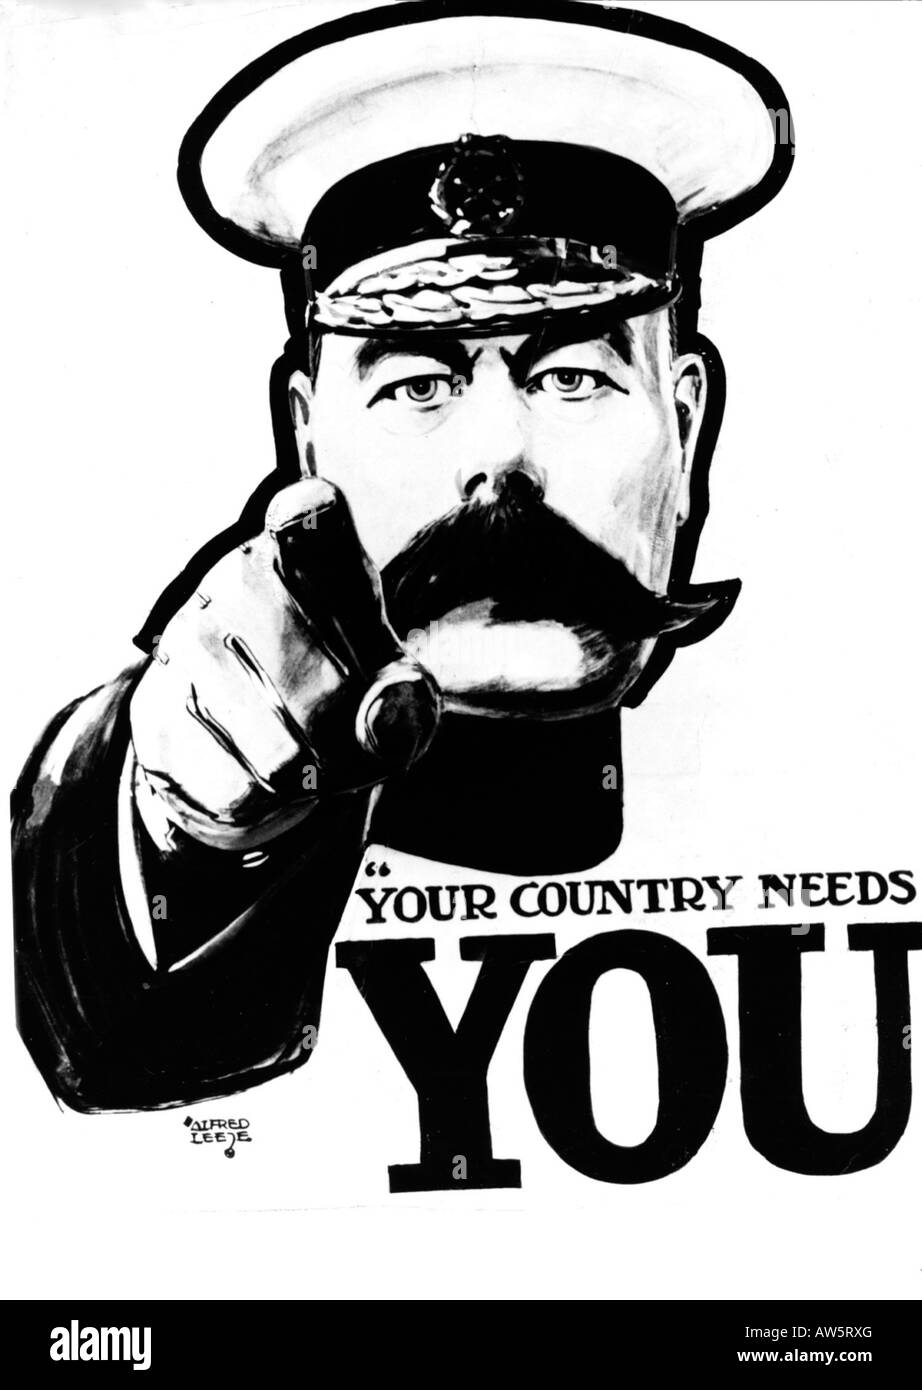 YOUR COUNTRY NEEDS YOU Stock Photo: 16475175 - Alamy